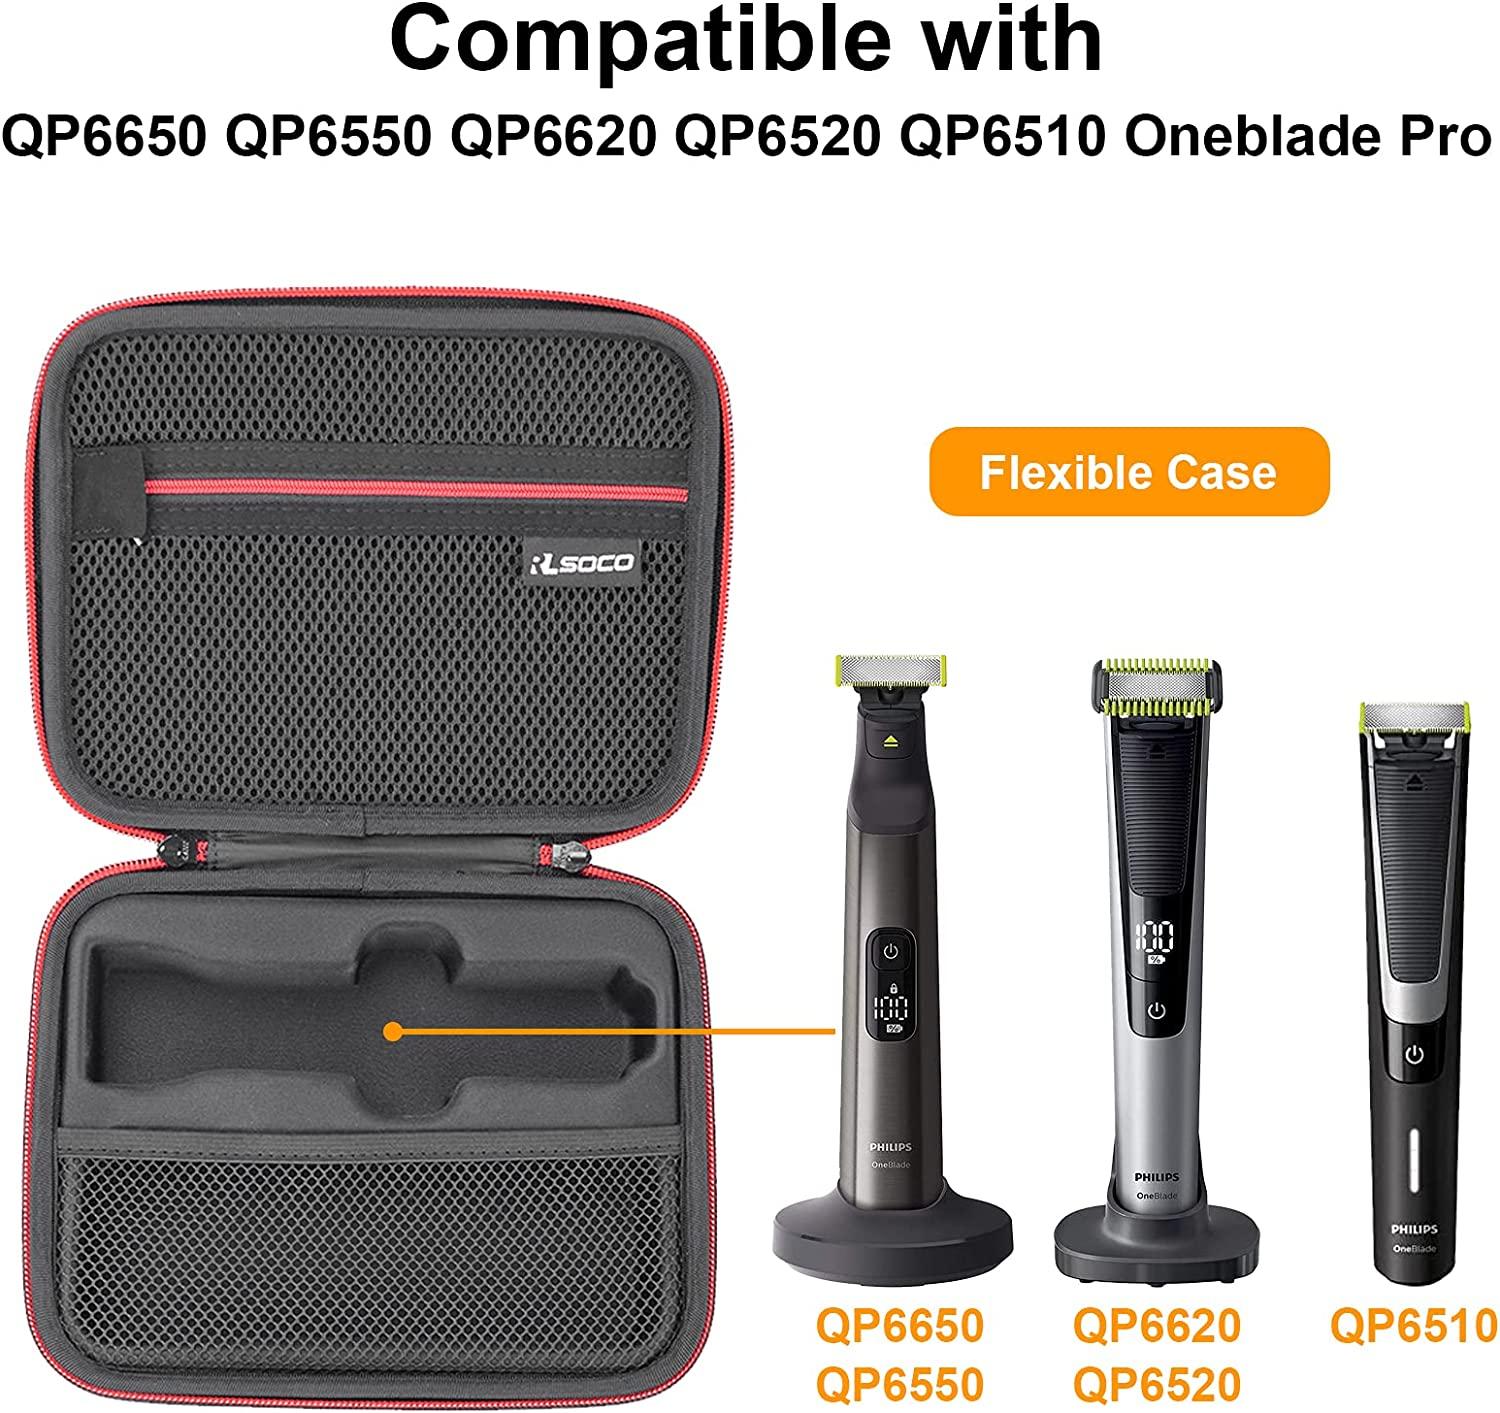 RLSOCO Hard Case for Philips Norelco Oneblade Pro QP6530/70 & QP6520/70 & QP6510/20 Hybrid Electric Trimmer Case for Philips